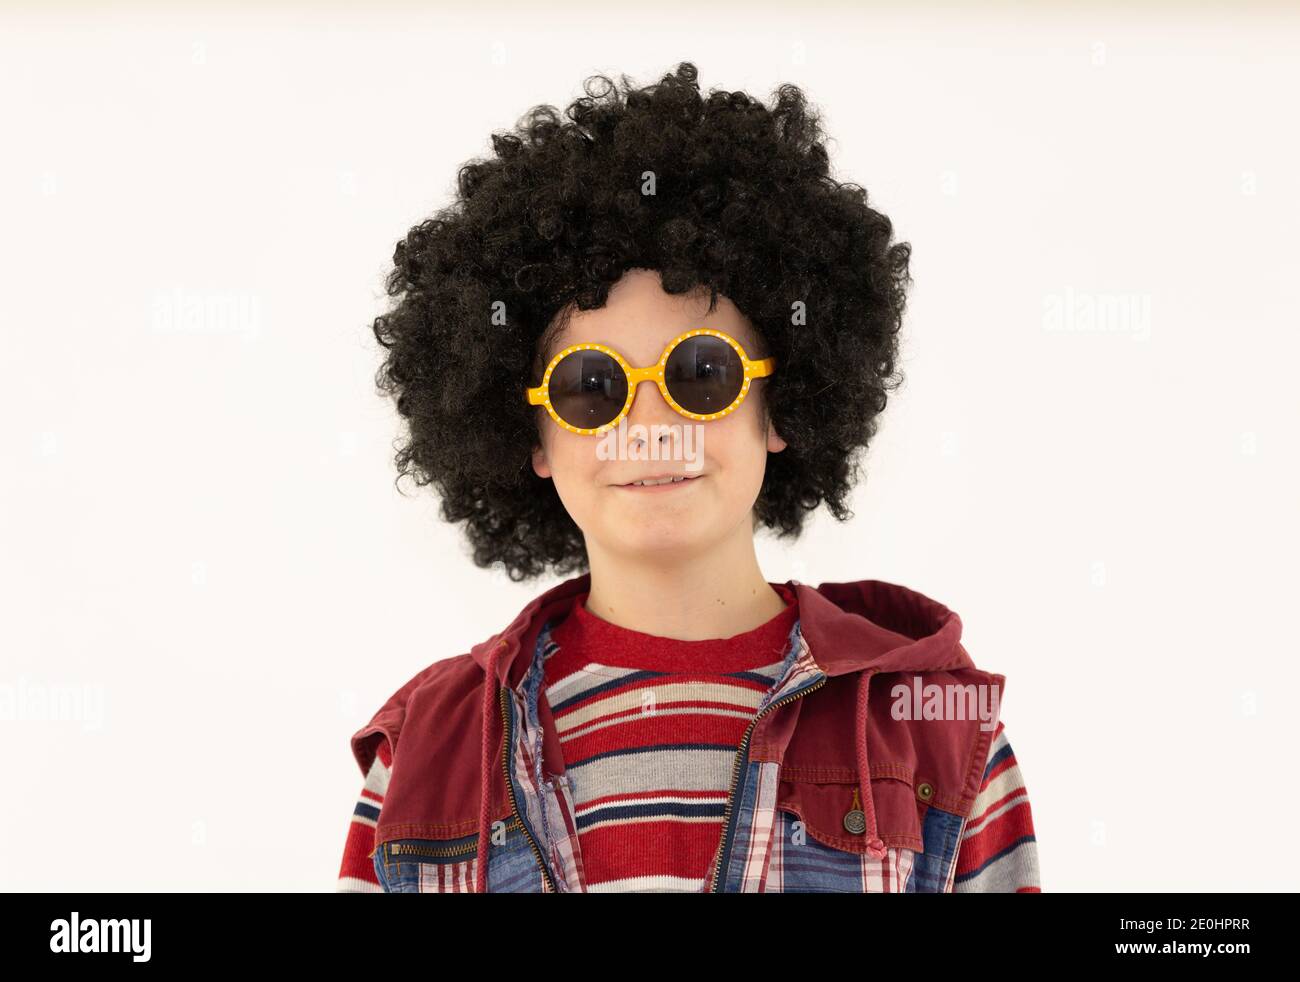 boy in afro hairstyle on a skateboard poses on a white background, boy in sunglasses young Stock Photo